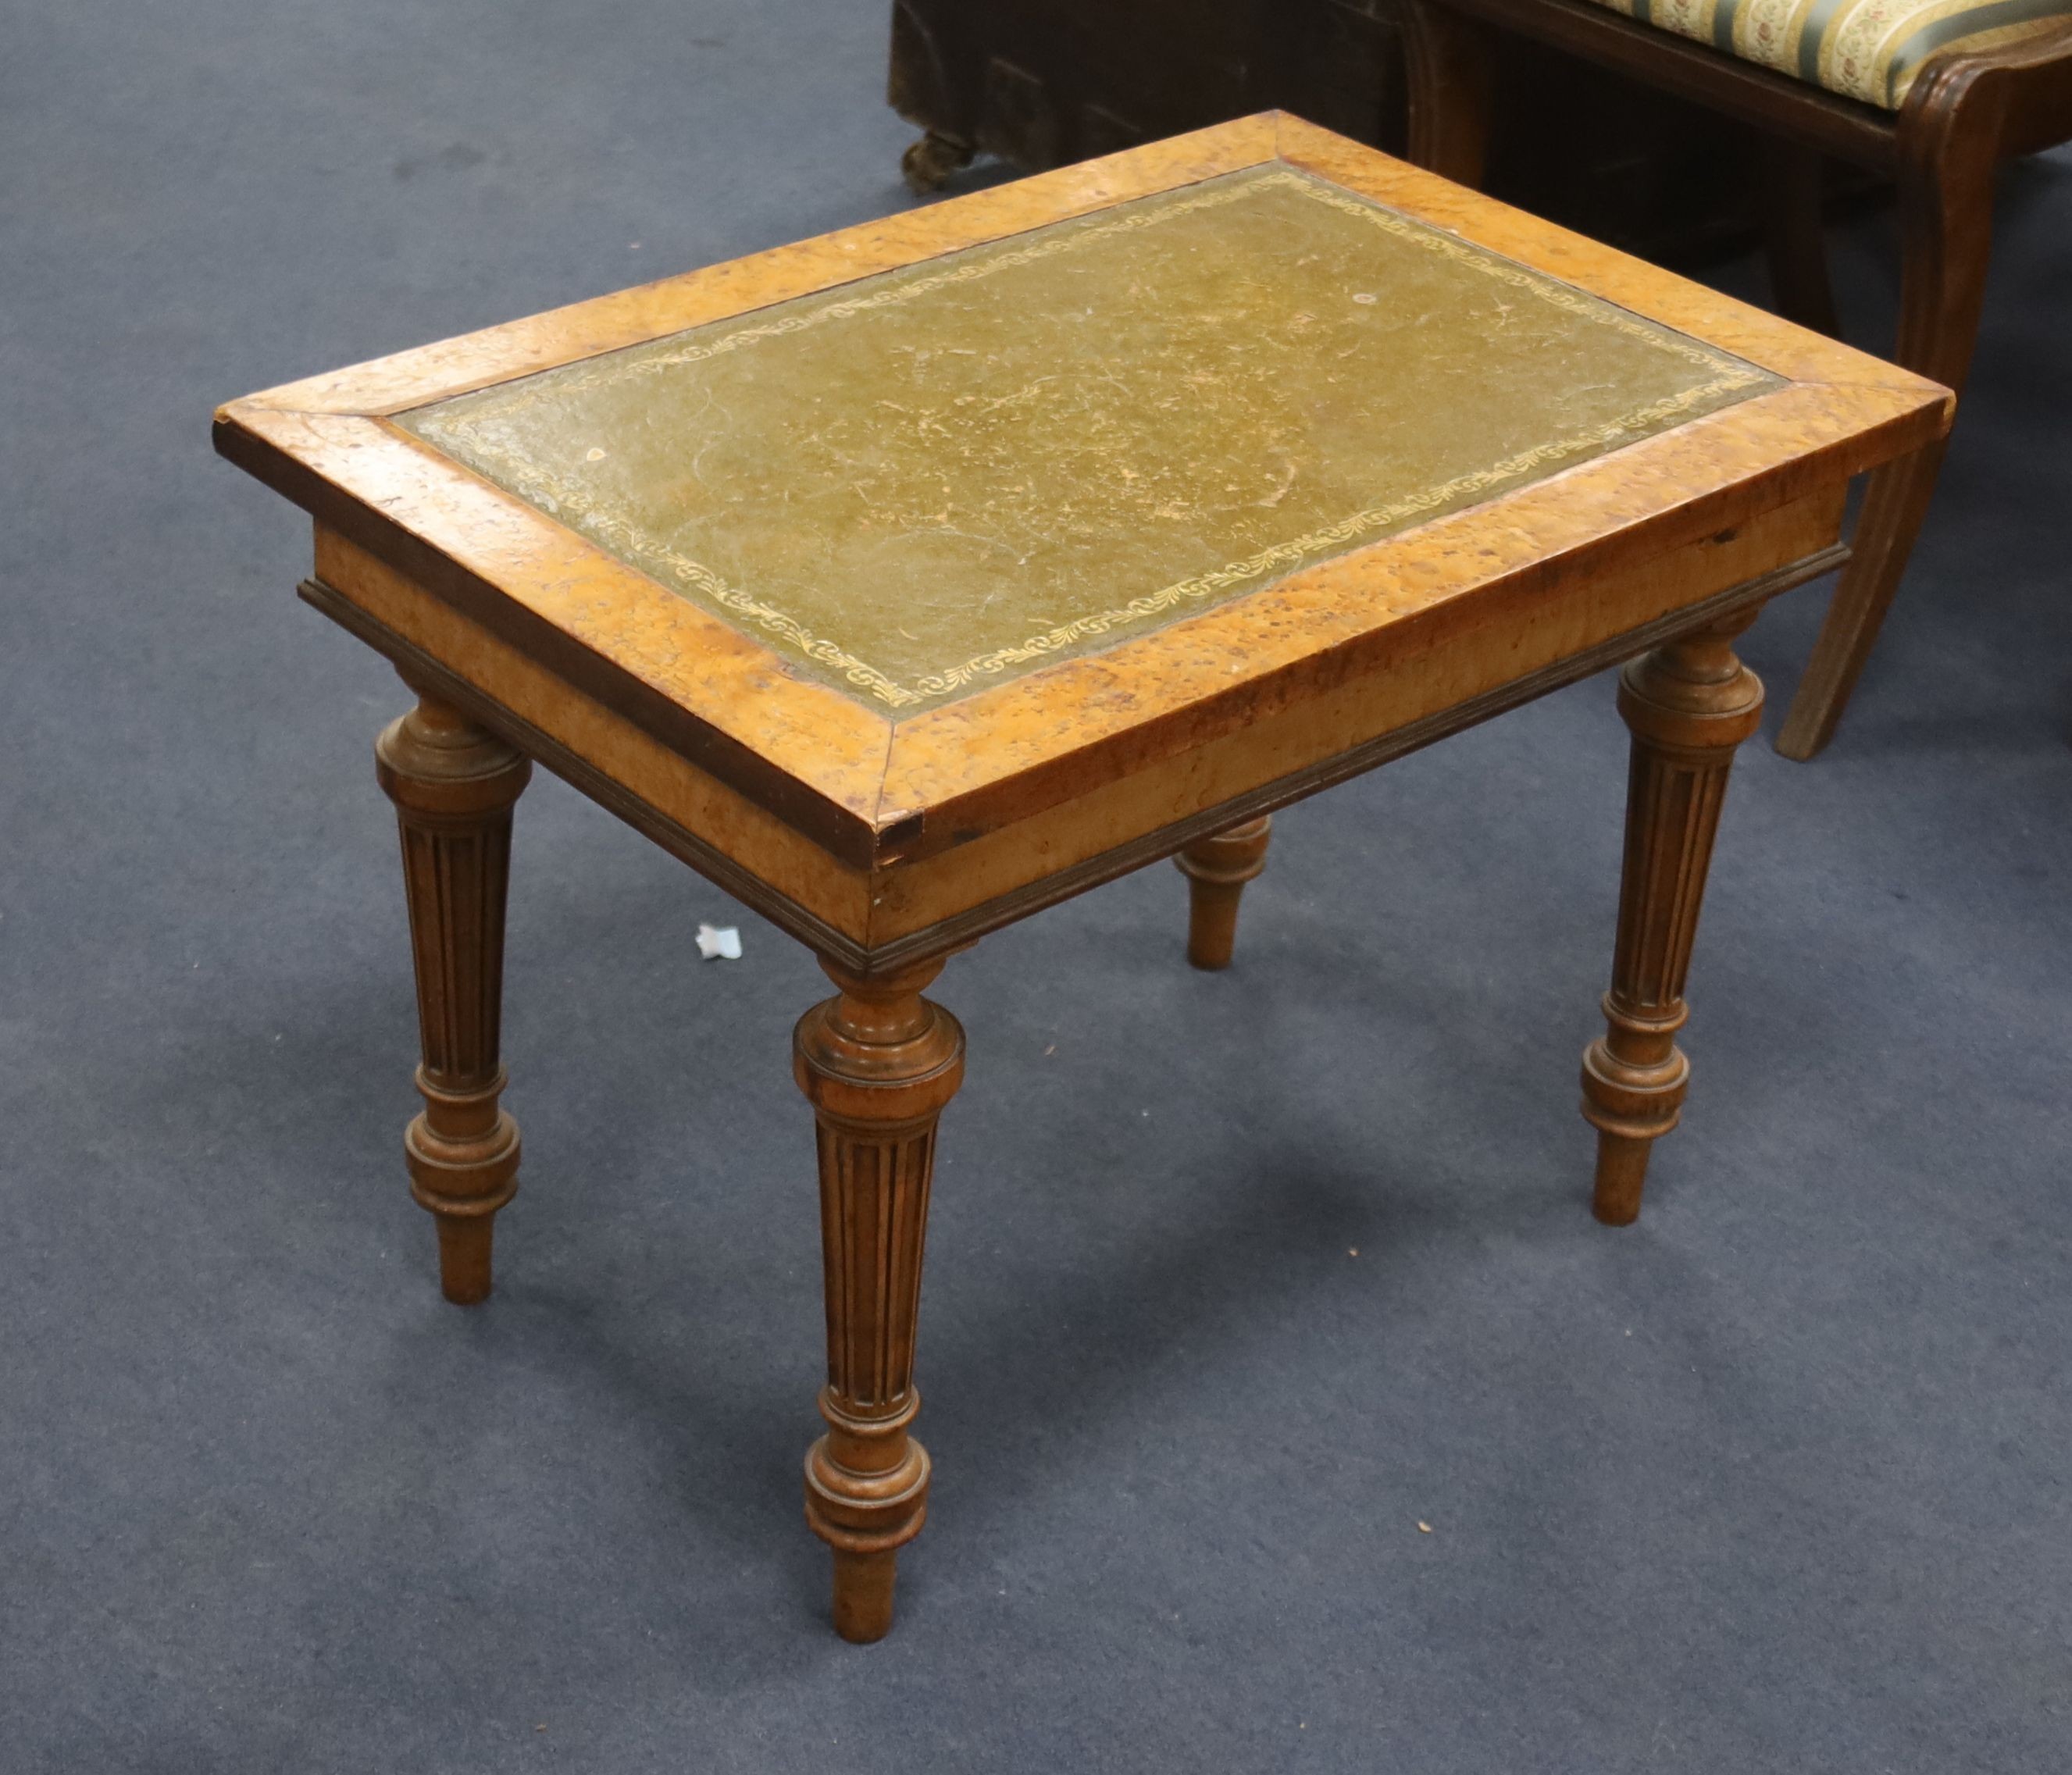 A Victorian bird's eye maple veneered leather-topped rectangular topped occasional table (ex bidet), width 66cm, depth 45cm, height 48cm